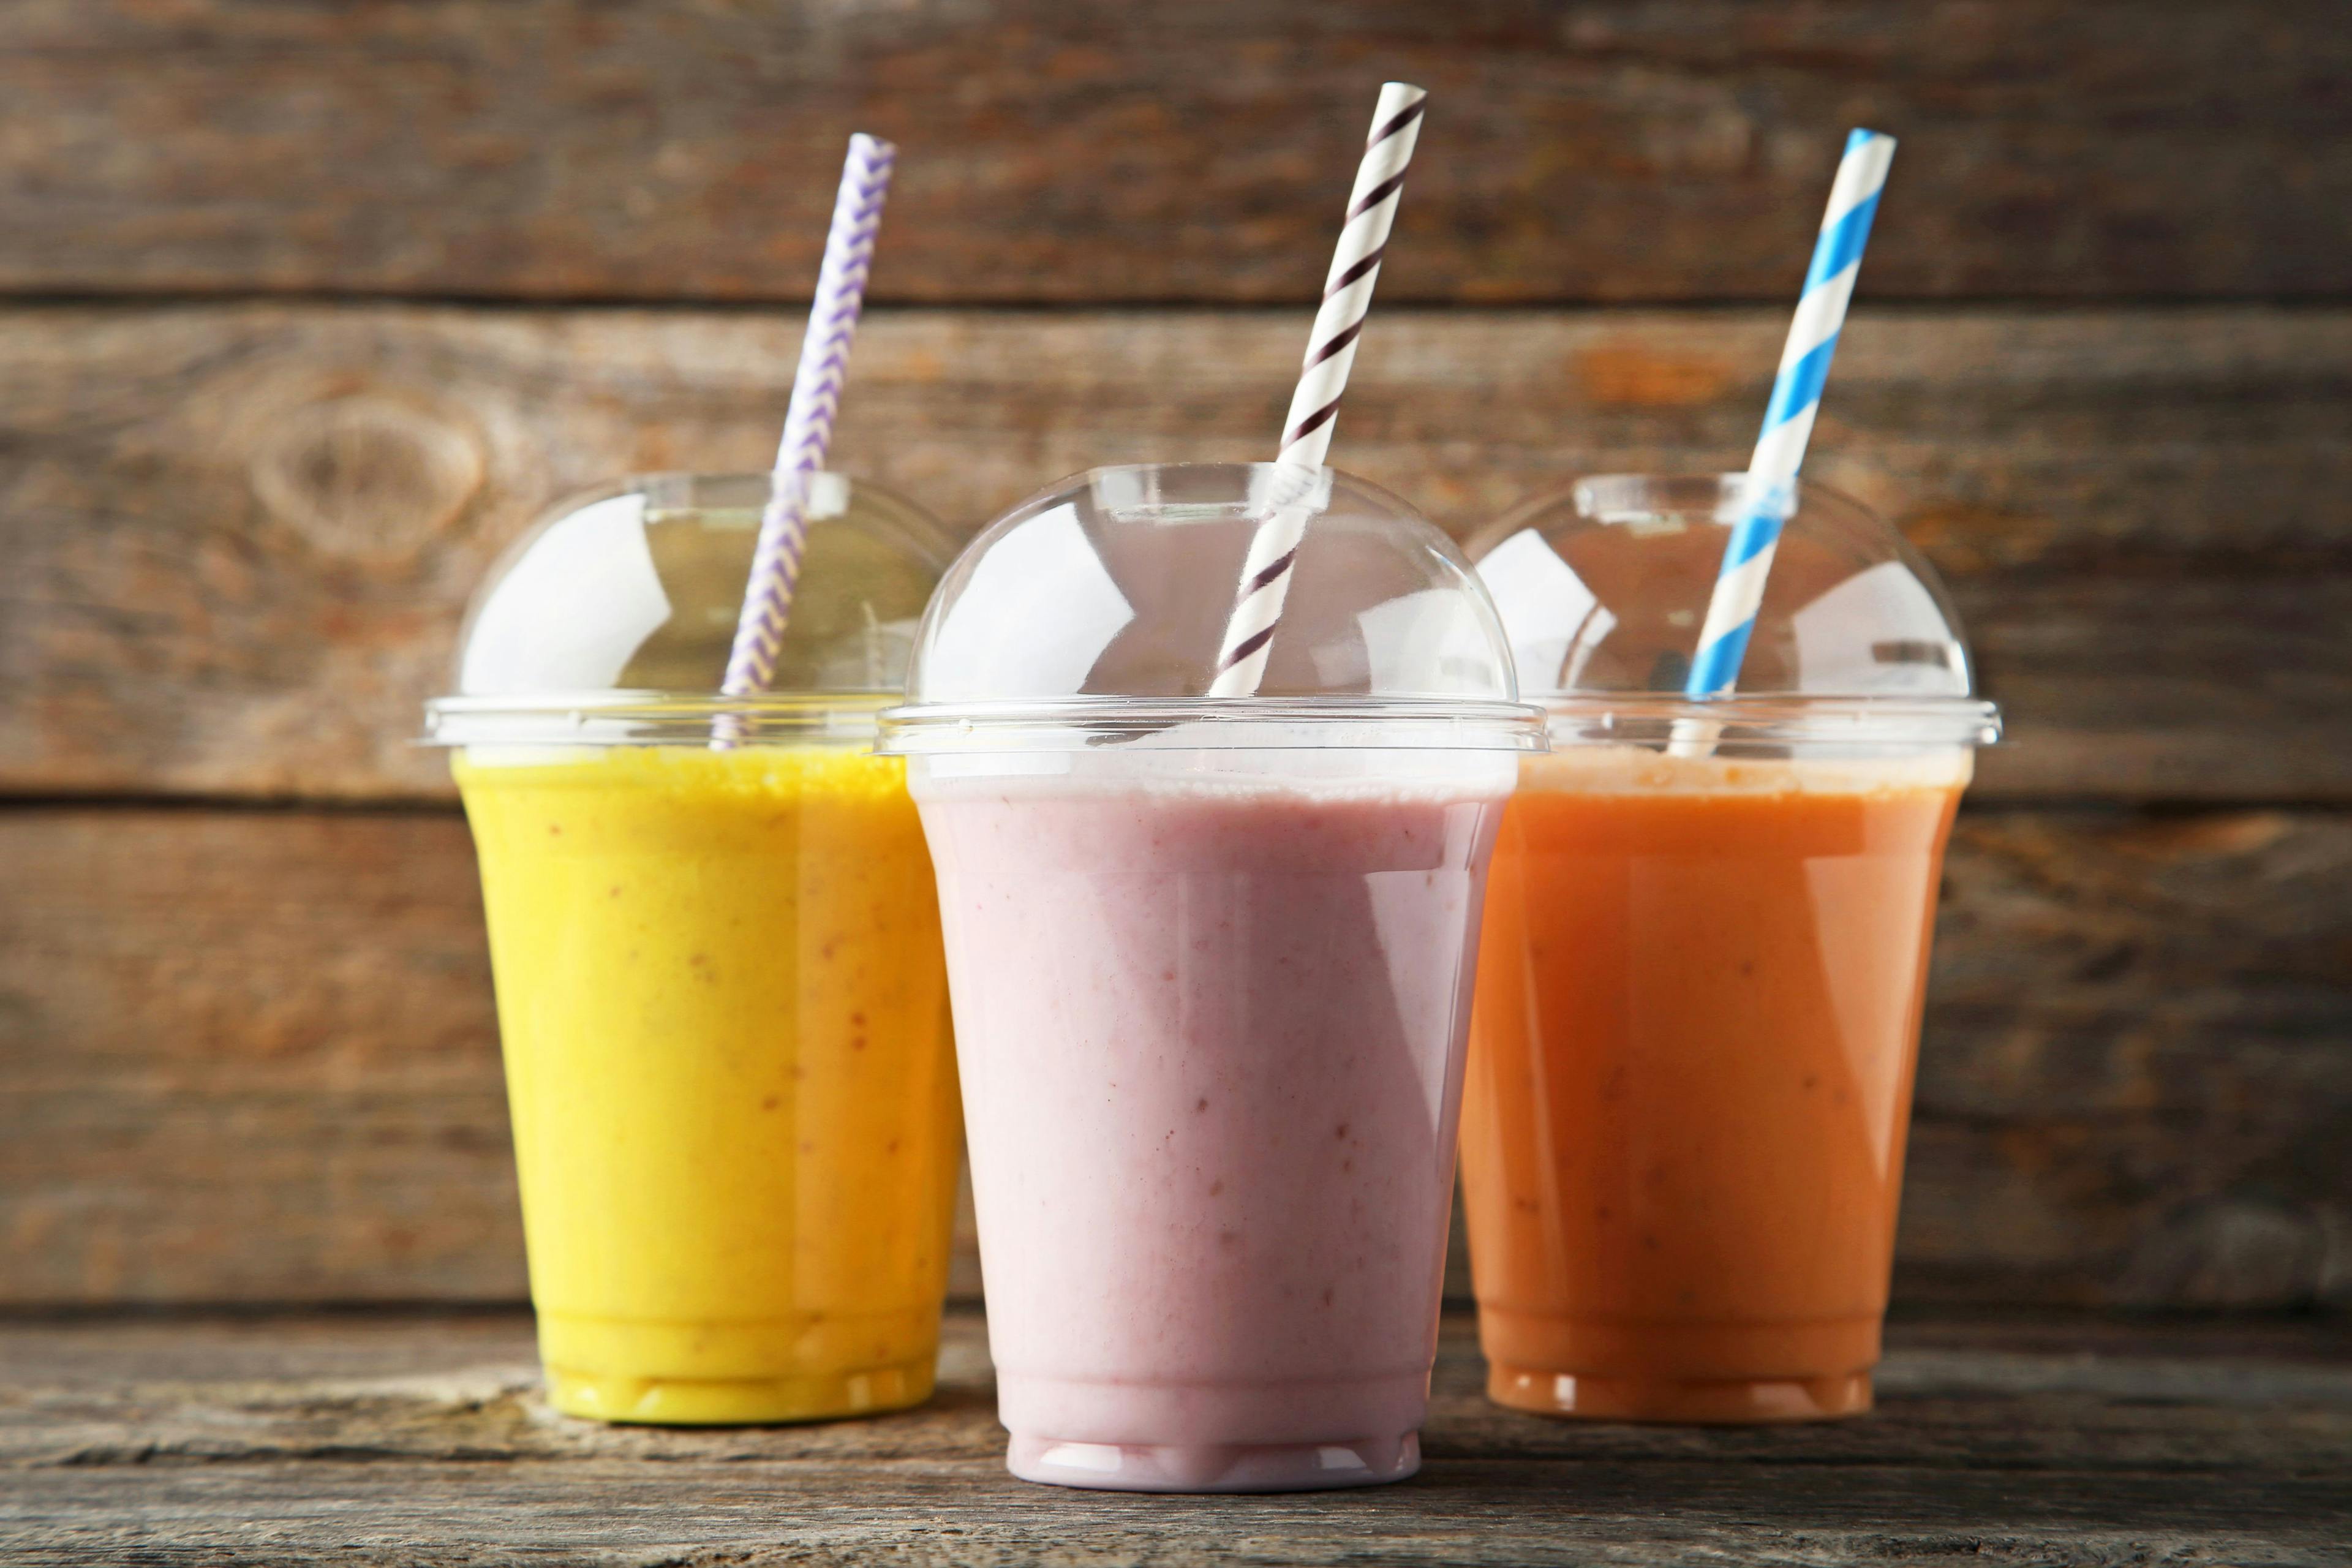 Sweet smoothie in plastic cups on wooden table | Image Credit: 5second - stock.adobe.com